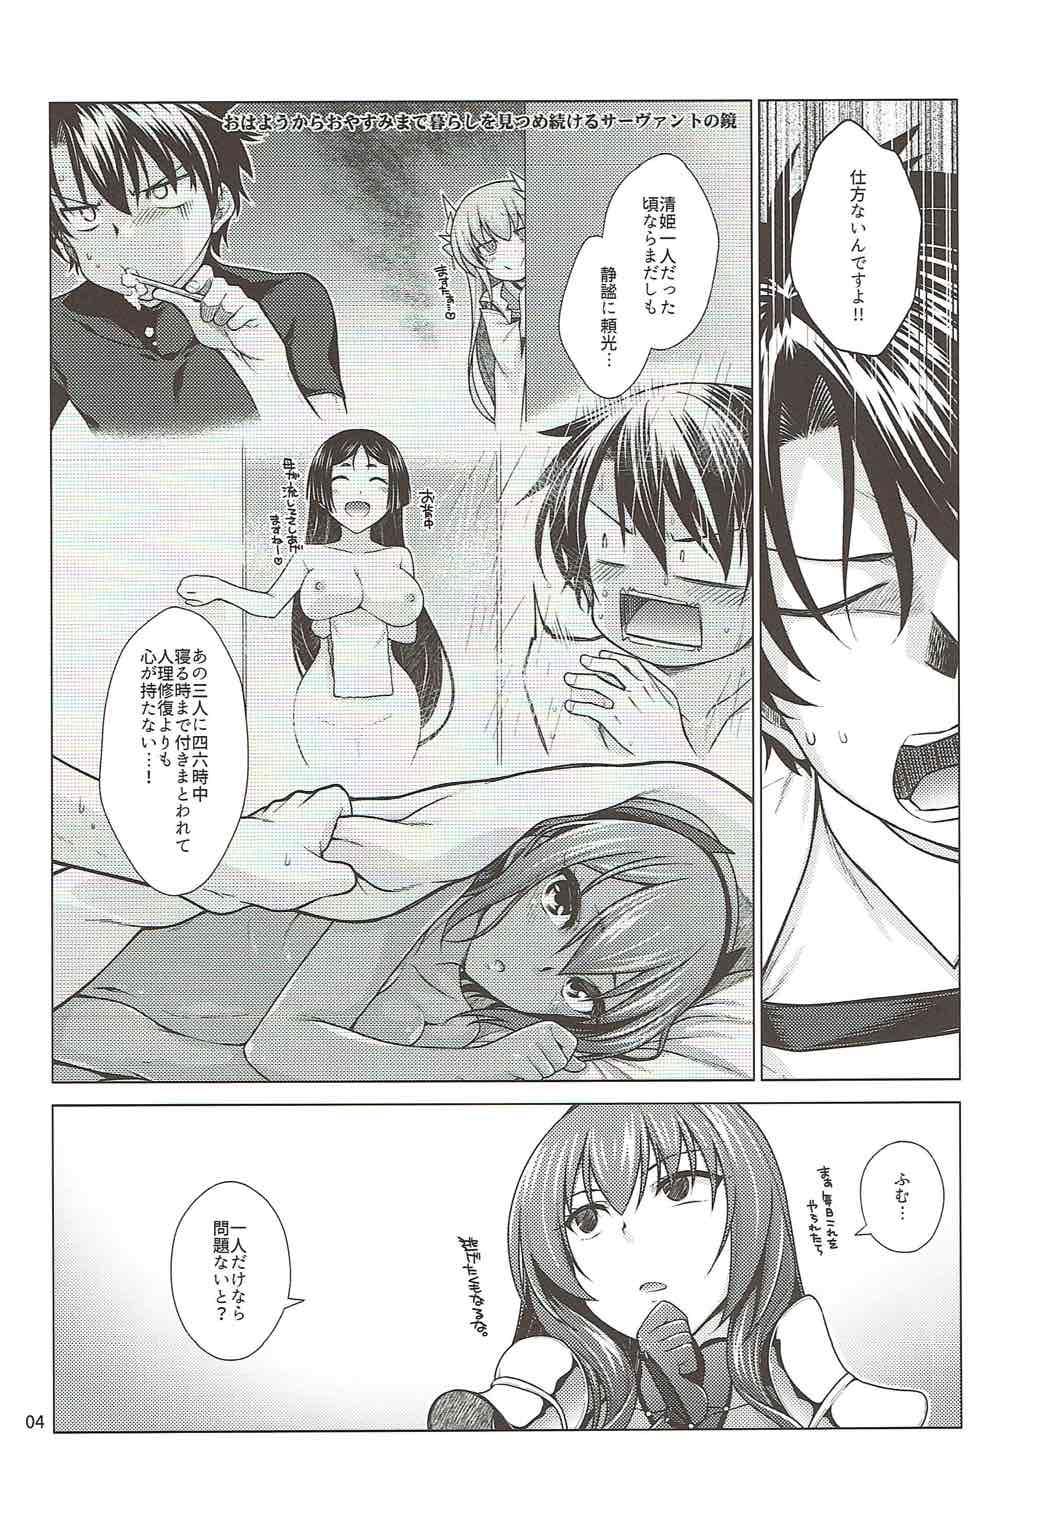 Doggy Style Porn Scathach Shishou to Celt Shiki Gachihamex! - Fate grand order  - Page 3